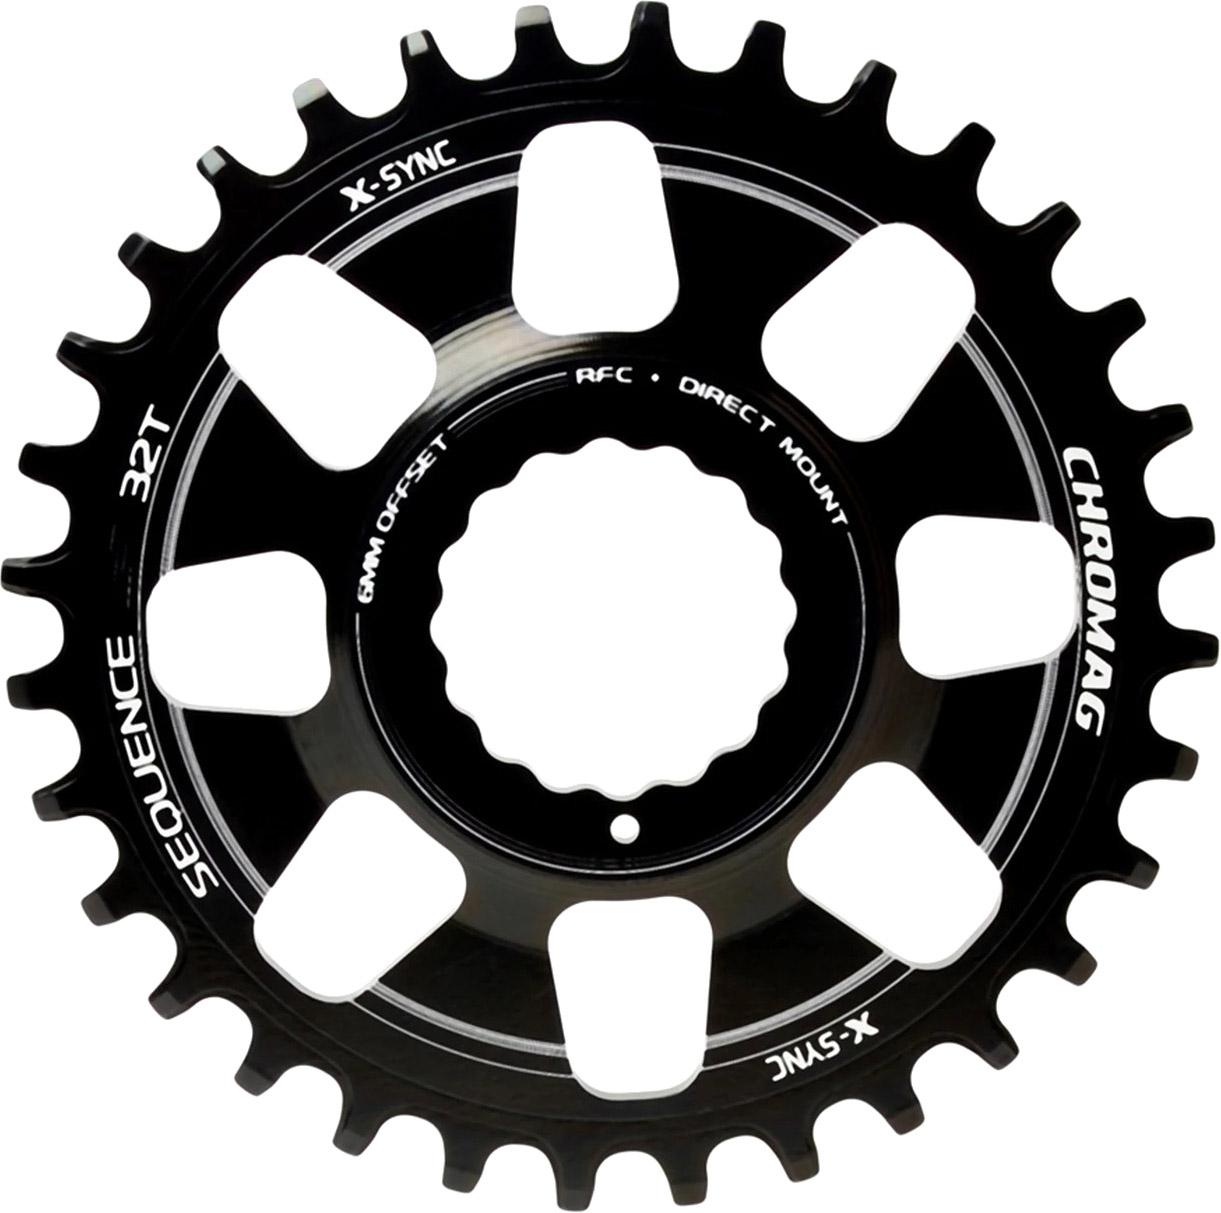 Chromag Sequence Cinch Boost Chainring - Black